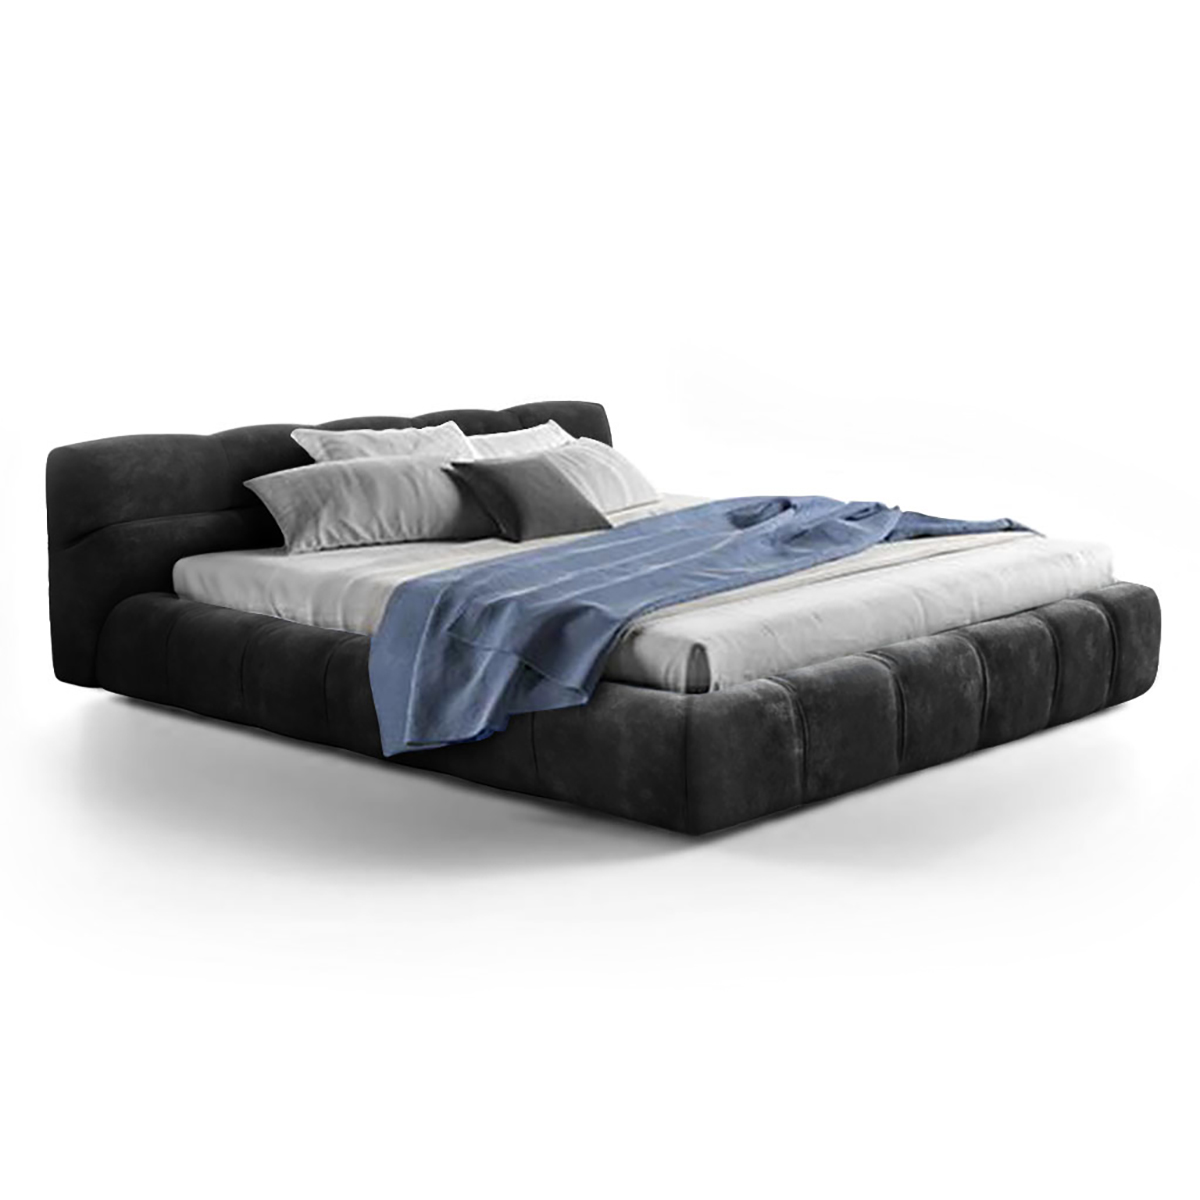 Tufted Bed Chenille Helios-Jet Black / California King Size